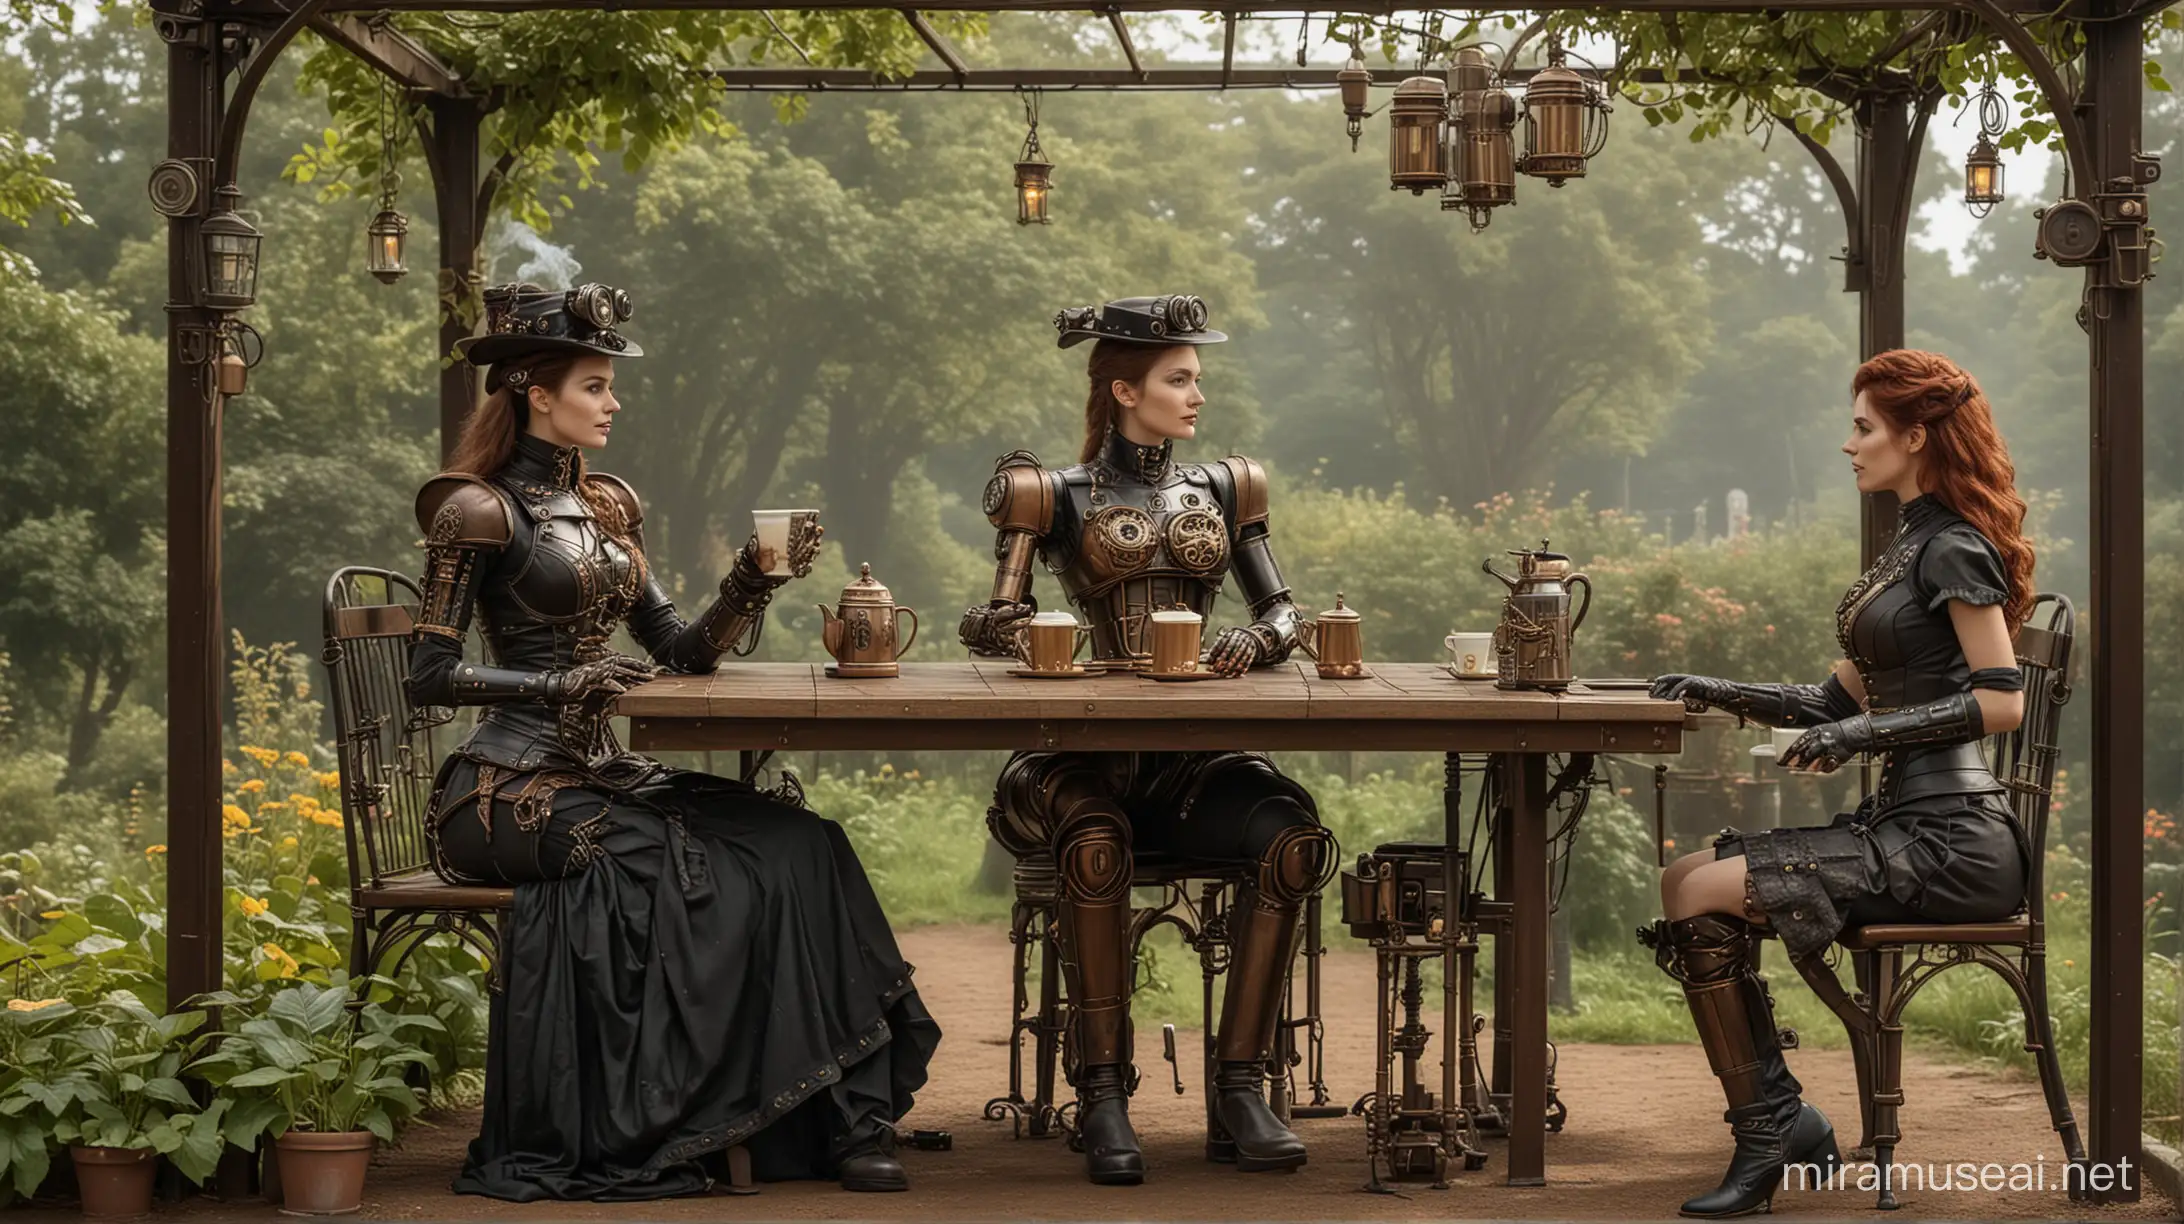 Steampunk Robot Serving Coffee to Two Women in Arbour